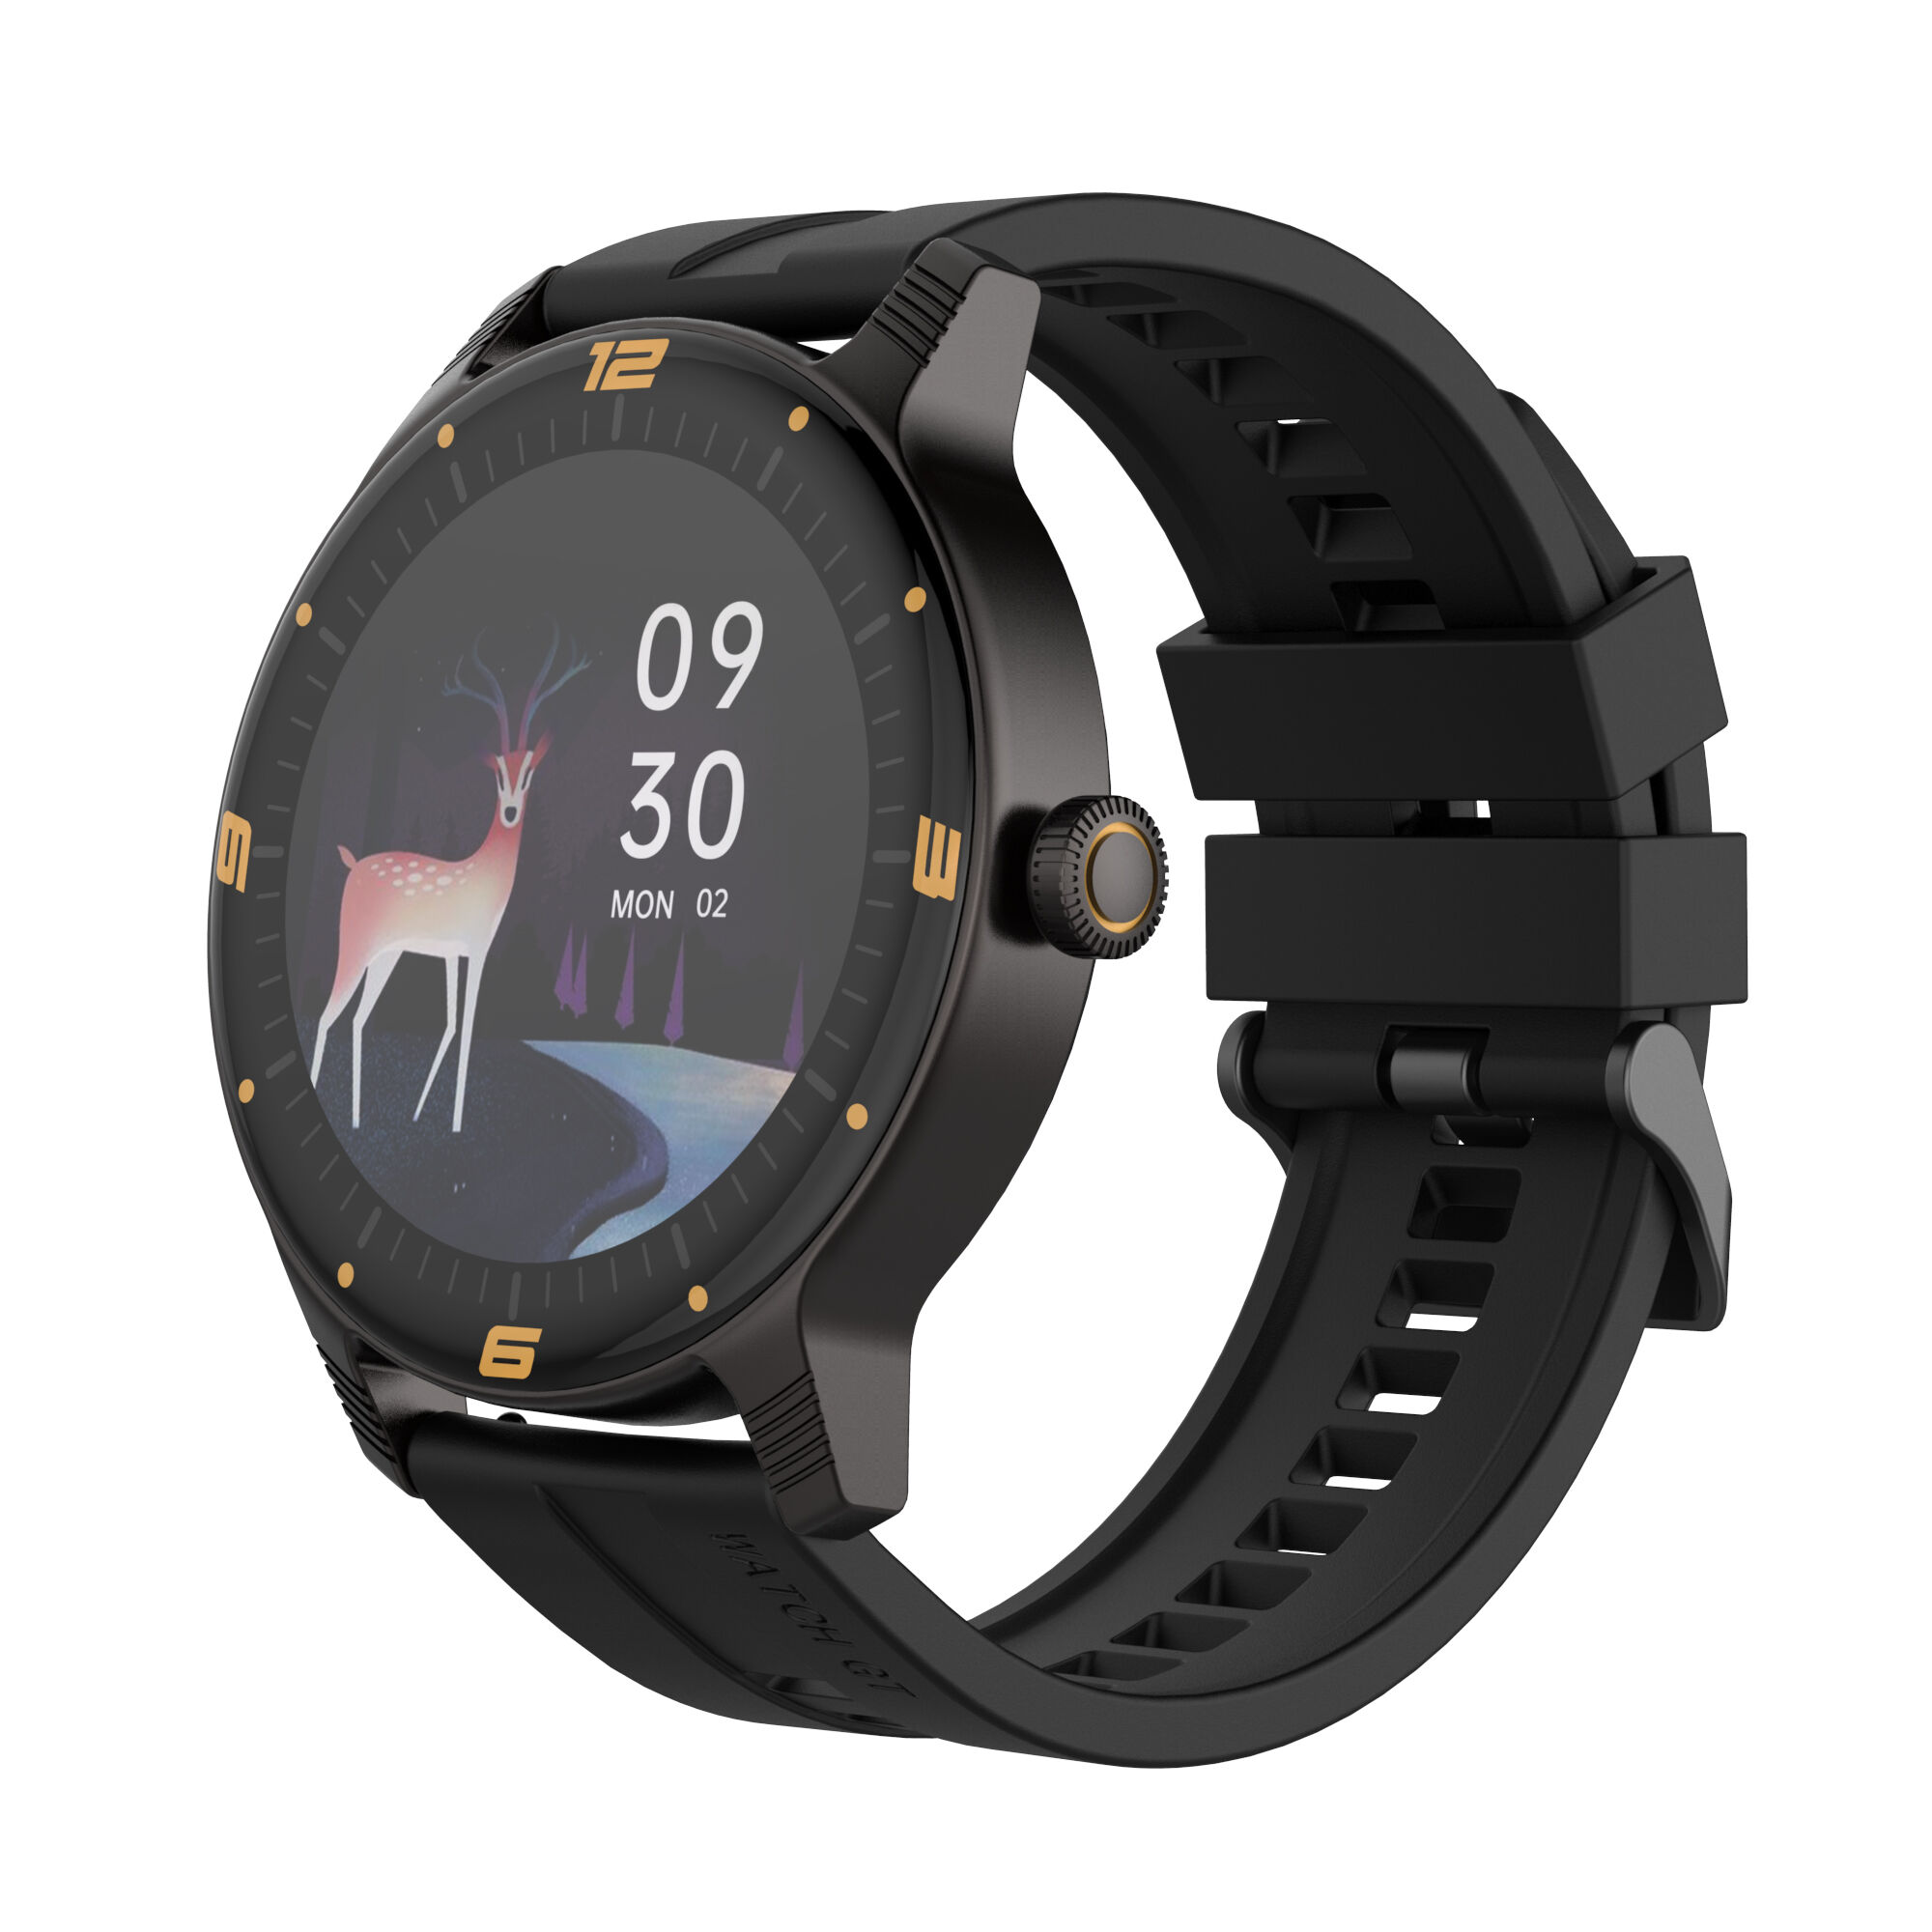 UNIWA KW390 1.39 inch Screen 4G Smart Watch, 2GB+16GB Android 8.1, Support  Heart Rate Monitoring / GPS / Alipay, snatcher